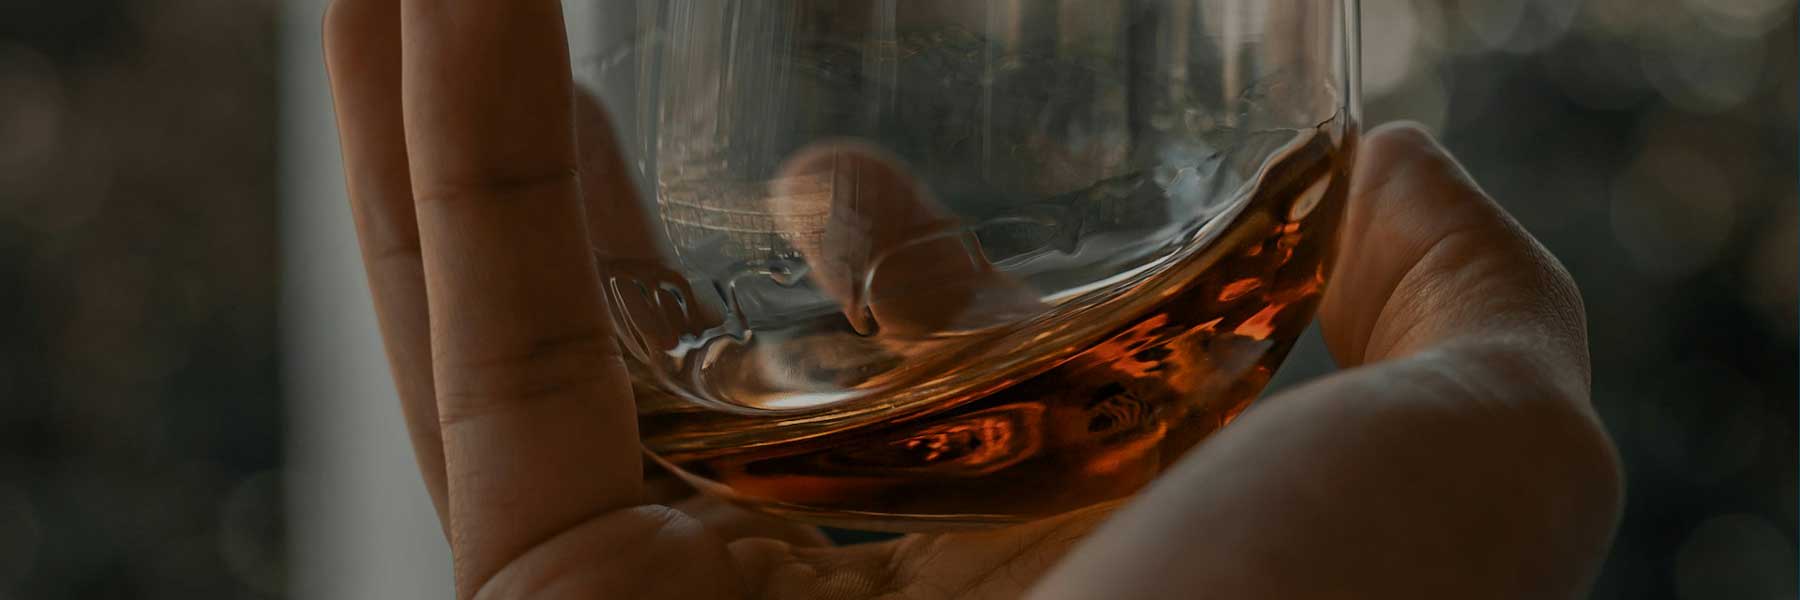 How to appreciate whiskey. 7 tips to enhance your drinking experience